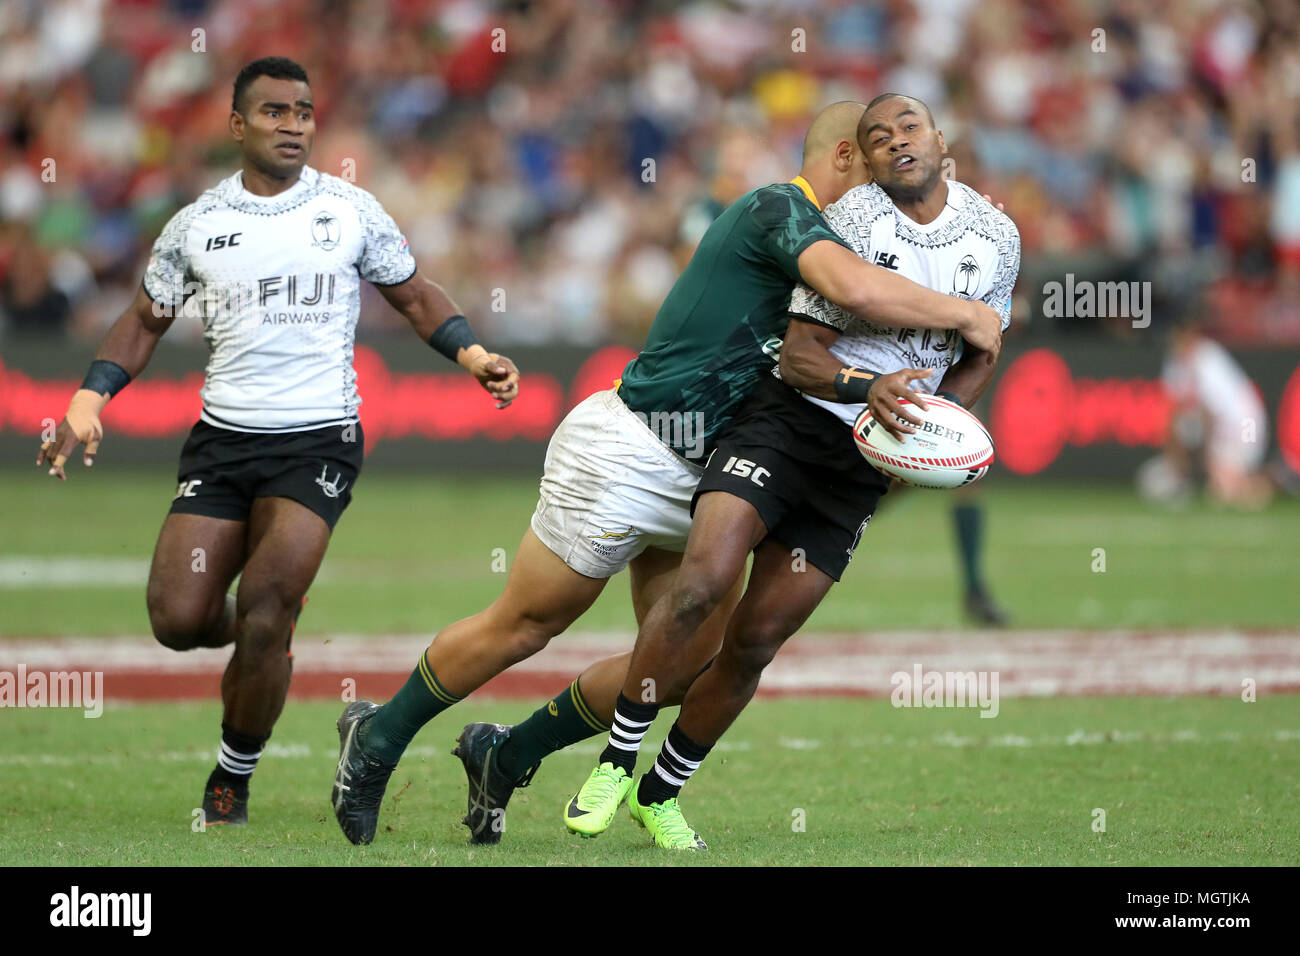 Singapore. 29th Apr, 2018. Alasio Sovita Naduva of Fiji (right) is tackled by Zain Davids of South Africa during the Cup Semi Final match between Fiji and South Africa at the Rugby Sevens tournament at the National Stadium. Singapore. Credit: Paul Miller/ZUMA Wire/Alamy Live News Stock Photo